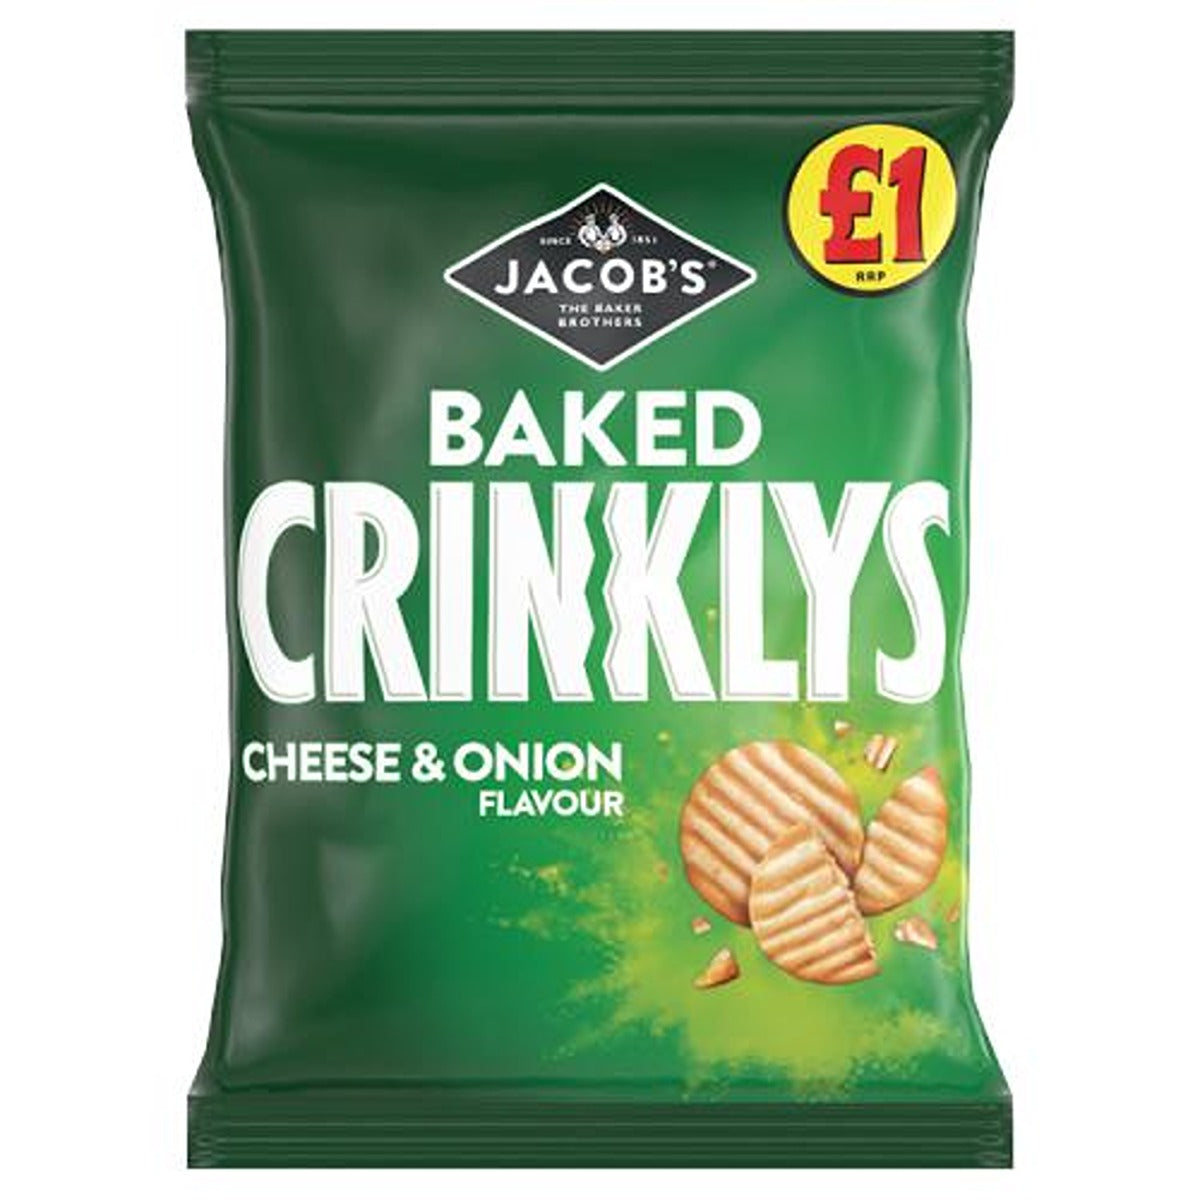 Jacob's - Baked Crinklys Cheese & Onion Snacks - 90g - Continental Food Store